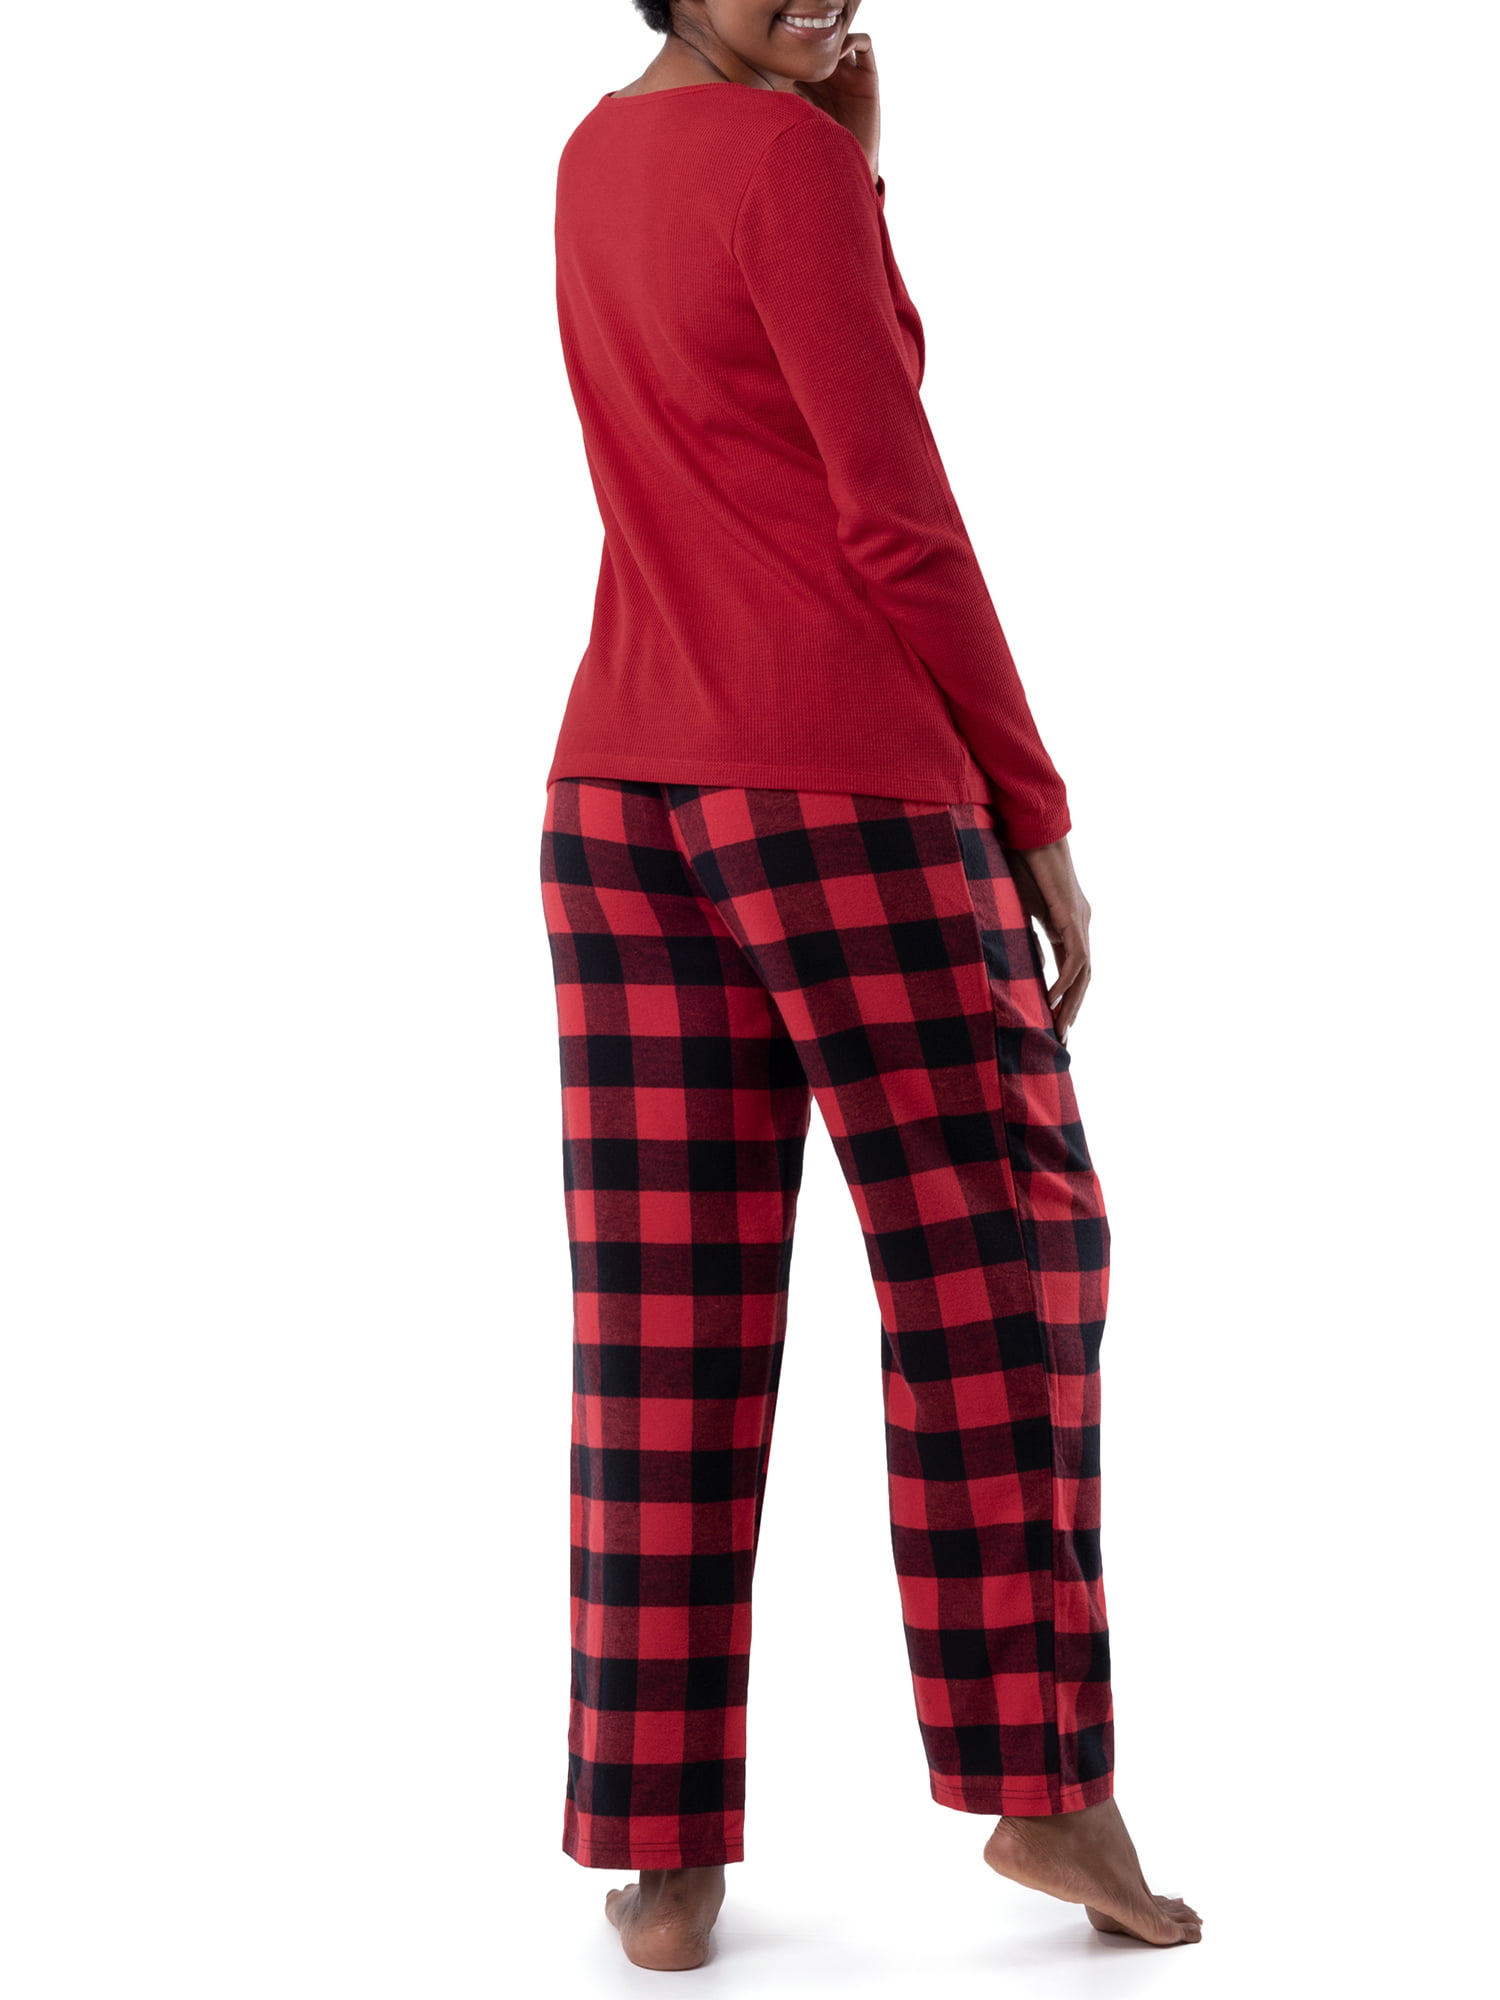 Fruit of the Loom Women's Beyond Soft Long Sleeve Waffle Top and Flannel  Bottom Pajama Set, Sizes S-4X 